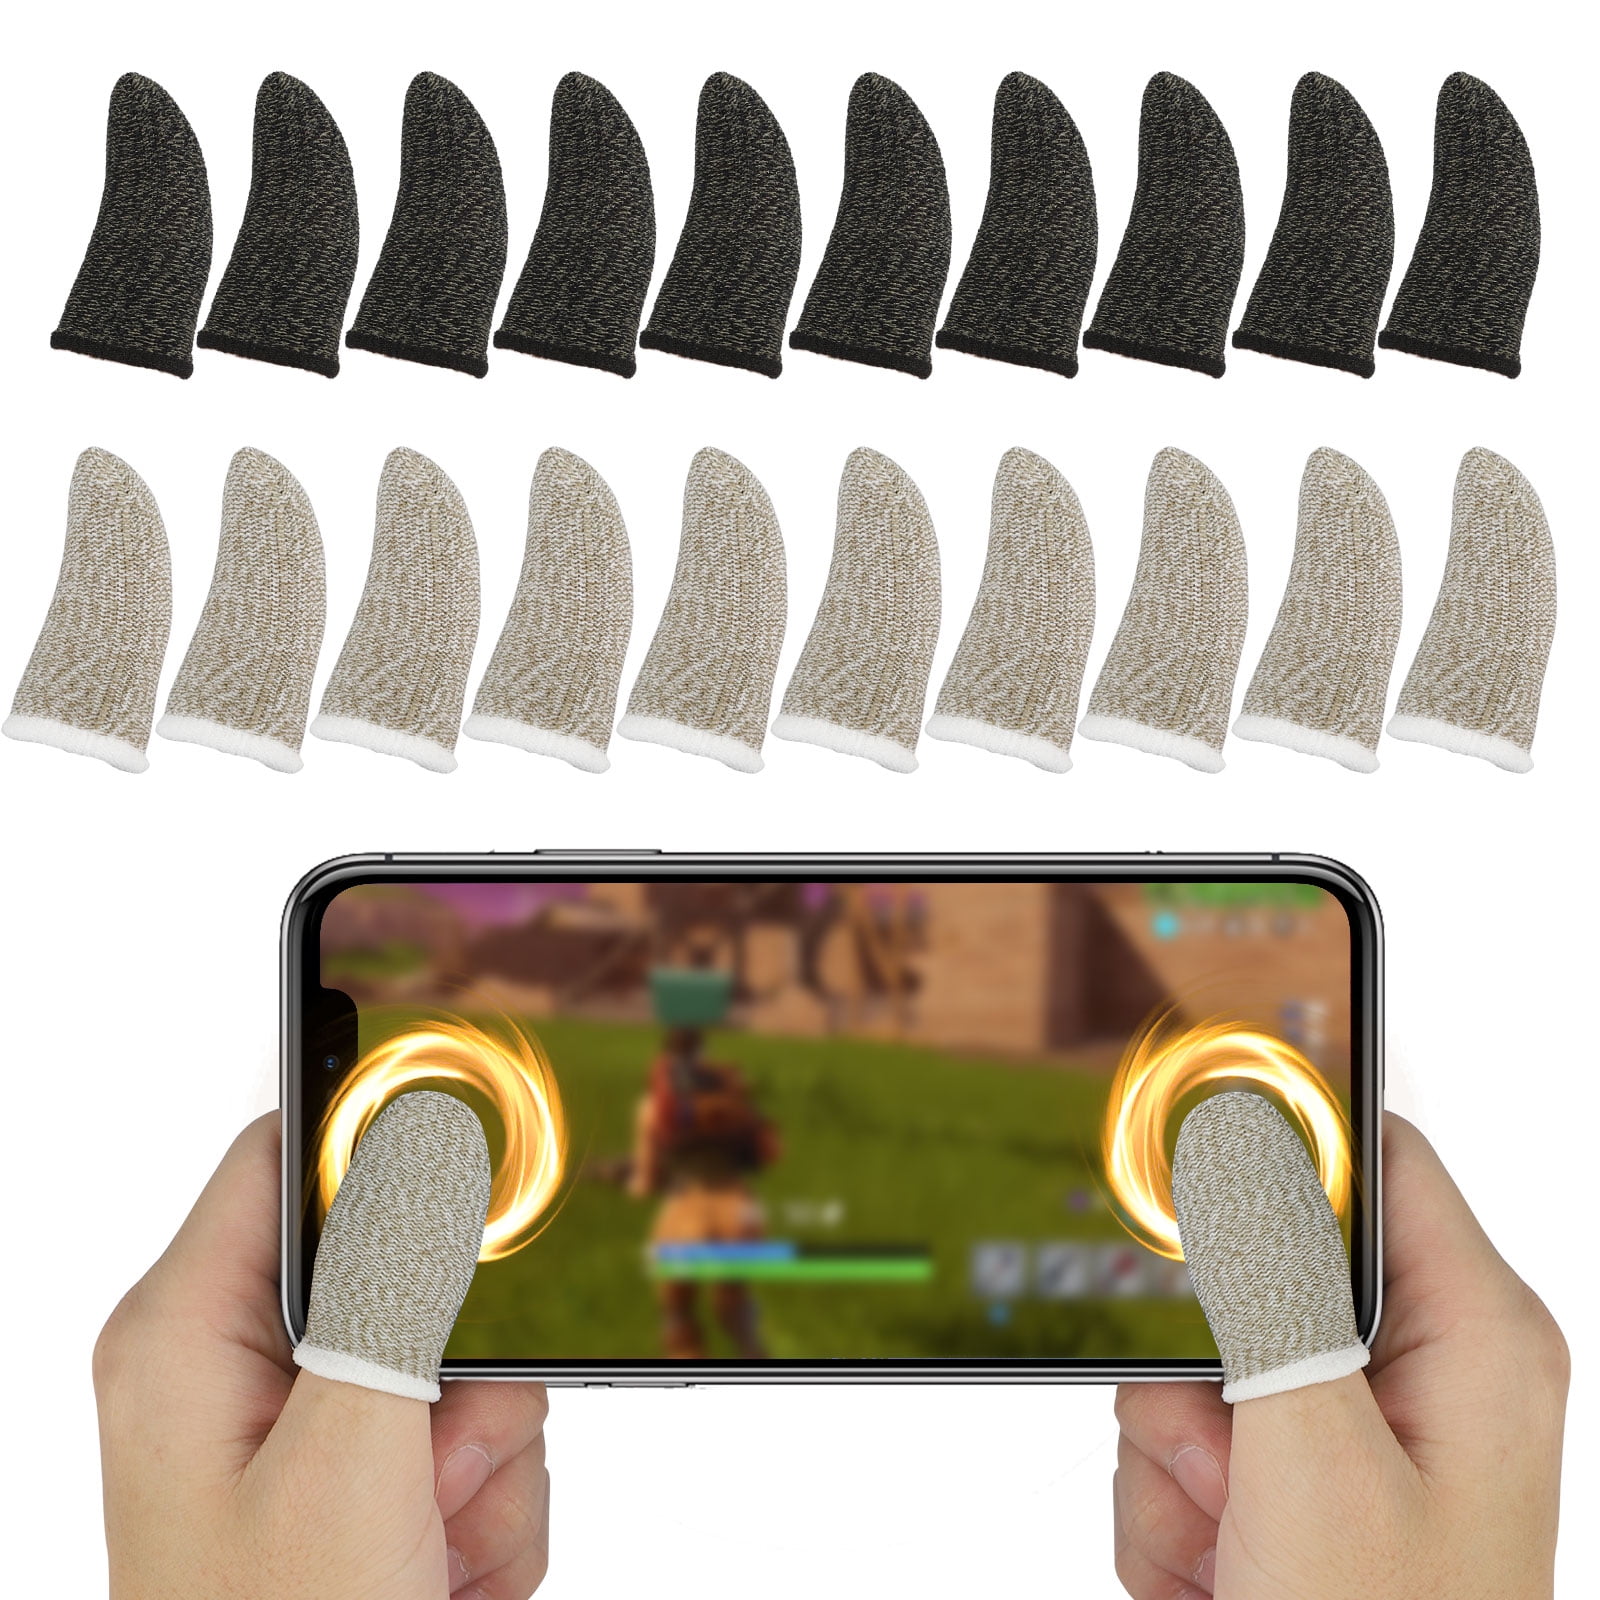 8 Packs Highly Sensitive Mobile Gaming Thumb Sleeves Smooth Thin Anti-Sweat Breathable Seamless Touchscreen Finger Sleeves for PUBG/Knives Out/Rules of Surviva Mobile Phone Finger Sleeves for Gaming 